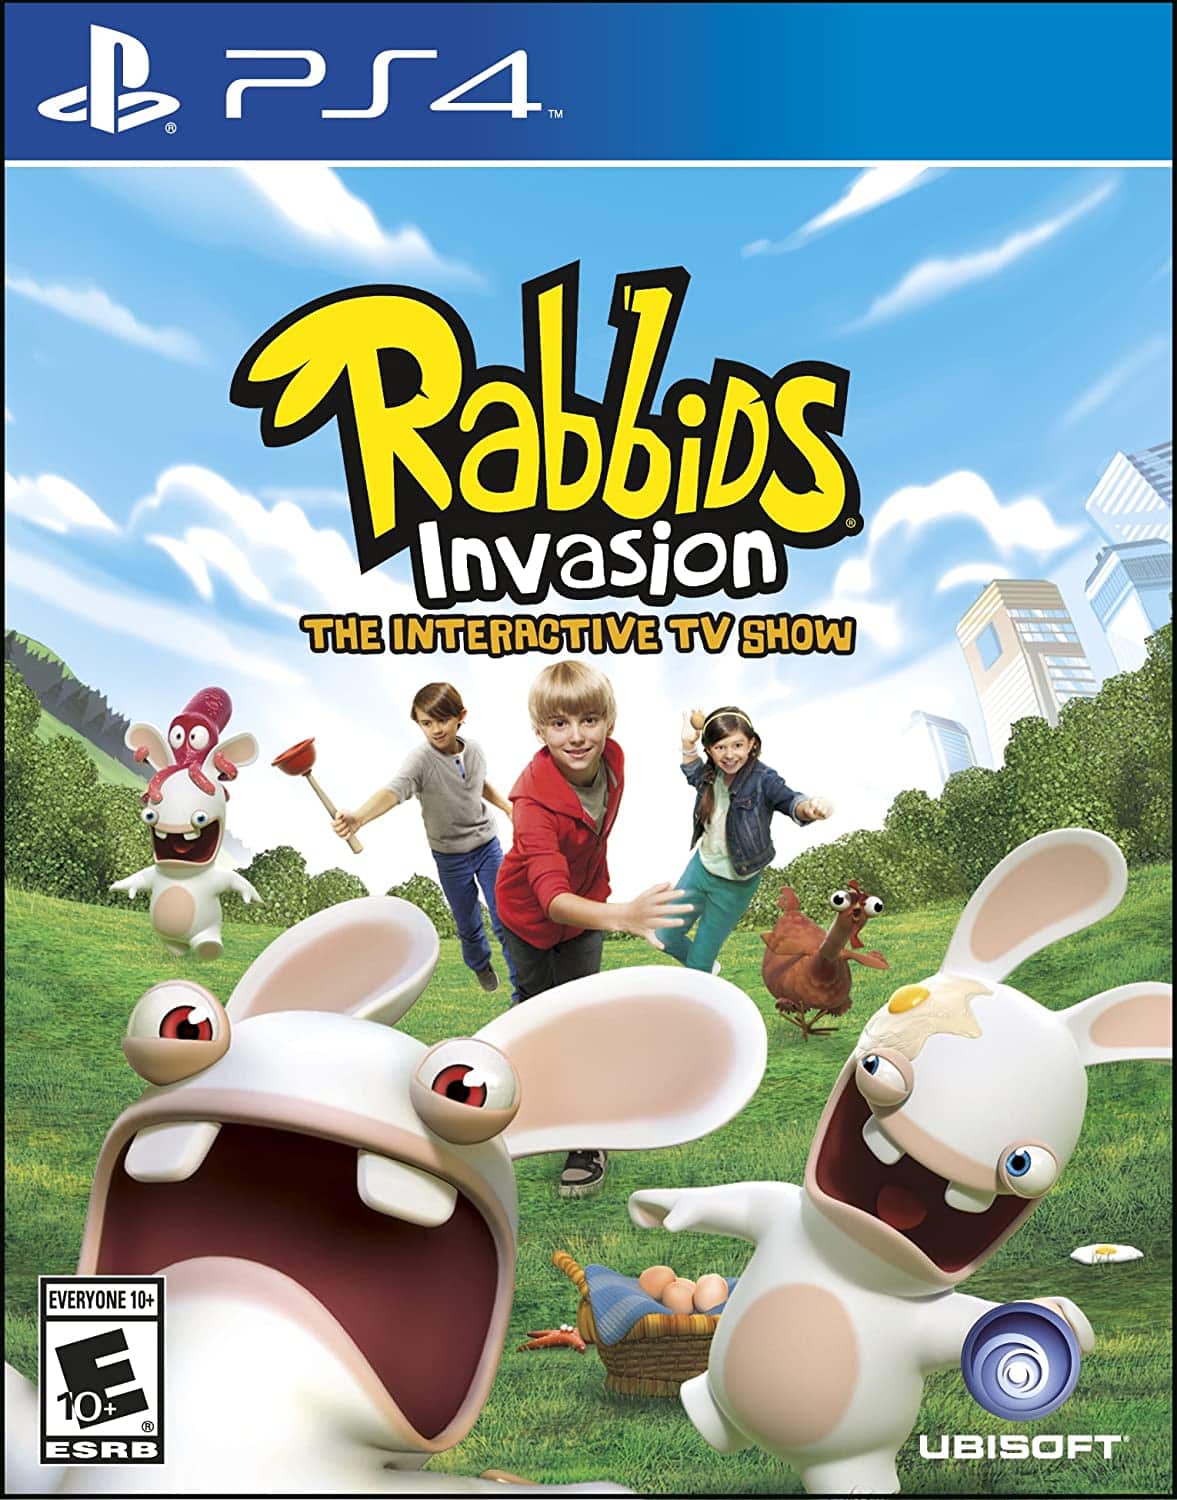 Rabbids Invasion: The Interactive TV Show player count stats